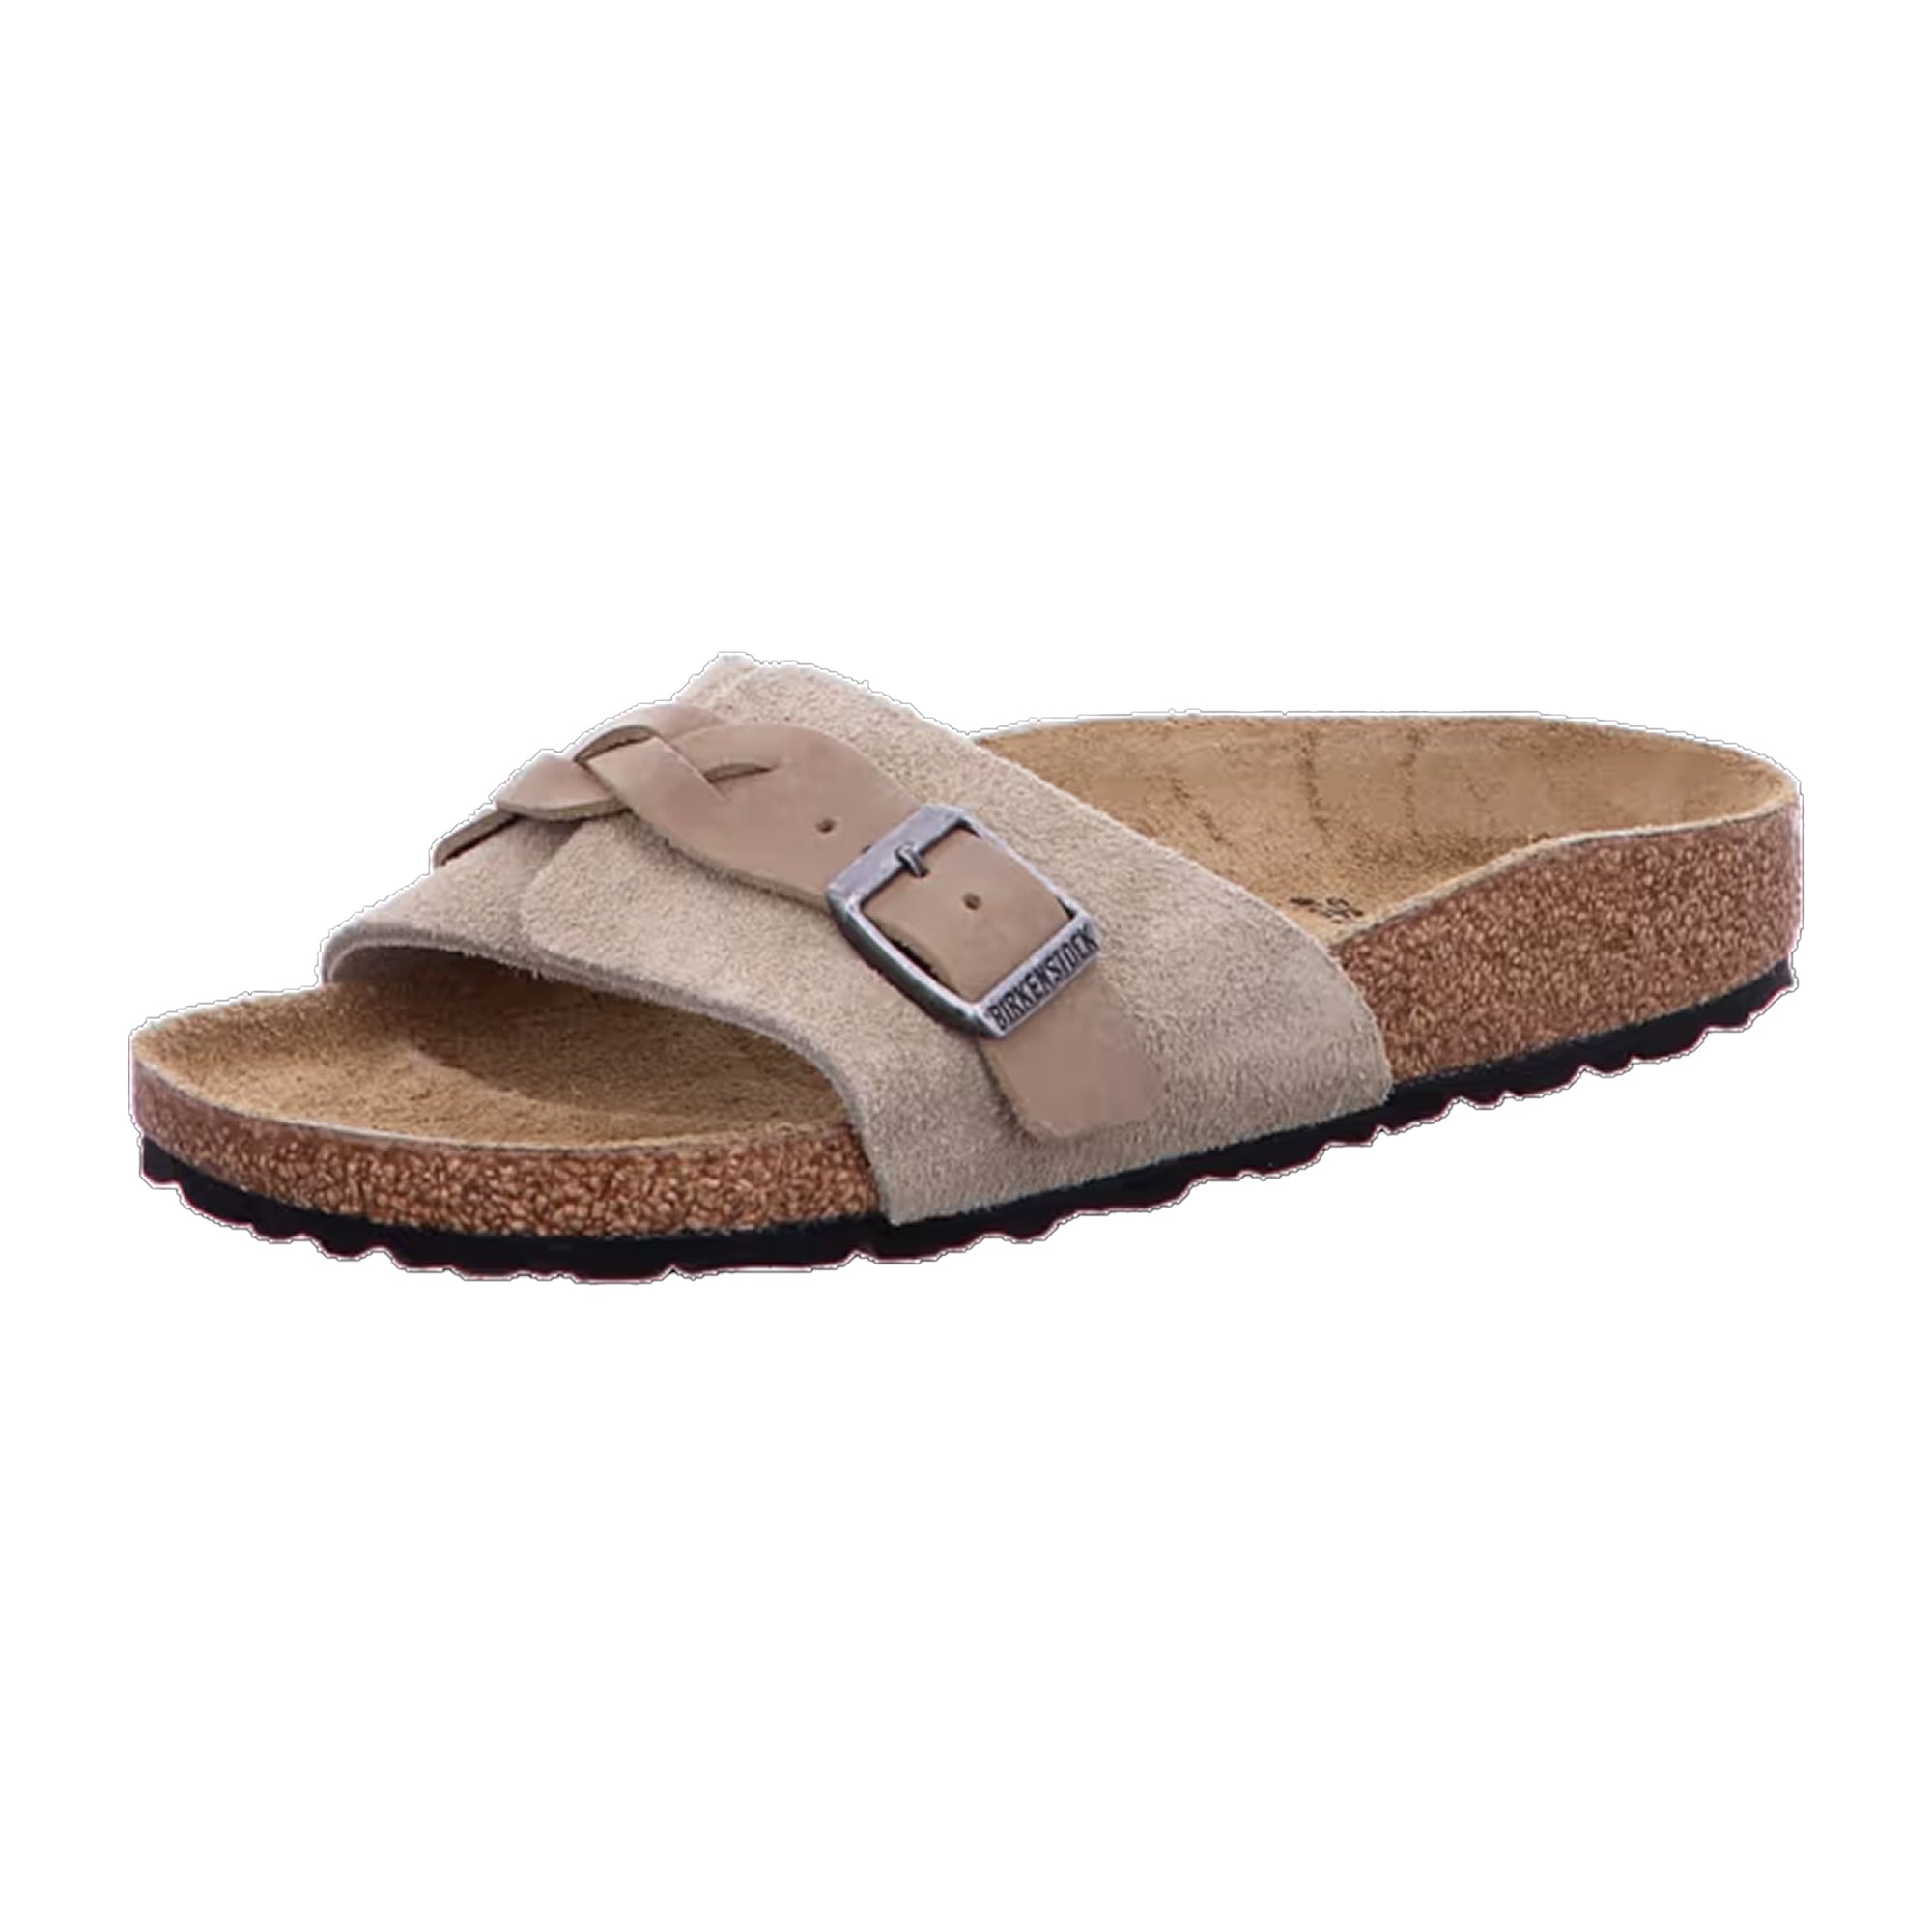 Birkenstock Oita Braided Suede Leather Slides Mules Sandals Mink Taupe New